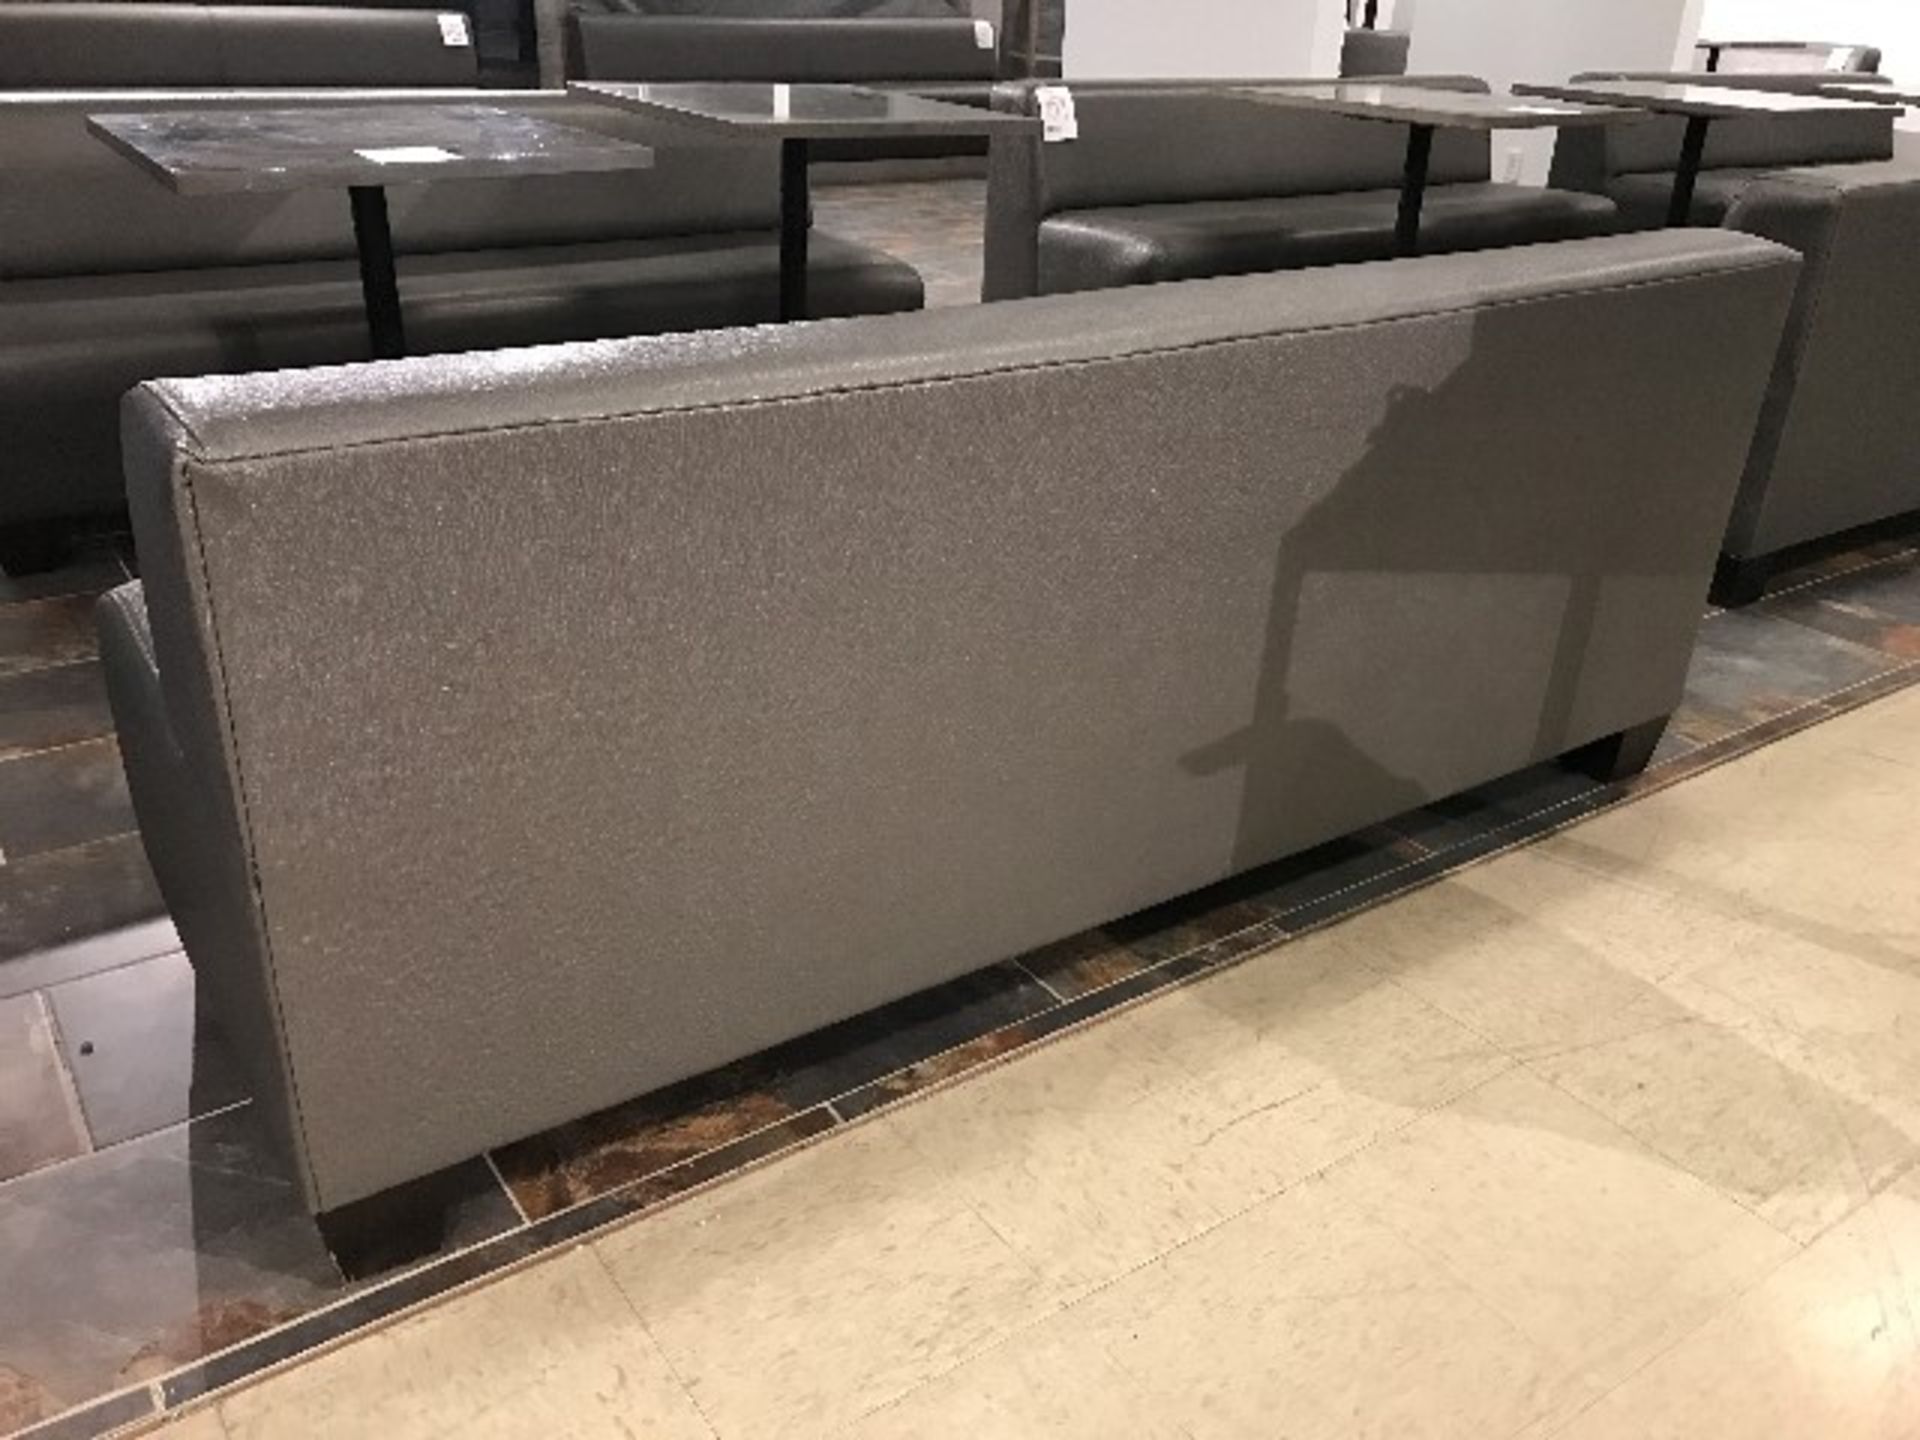 Banquette bench, finish all sides, W. 72”, 3 pcs - Image 2 of 6